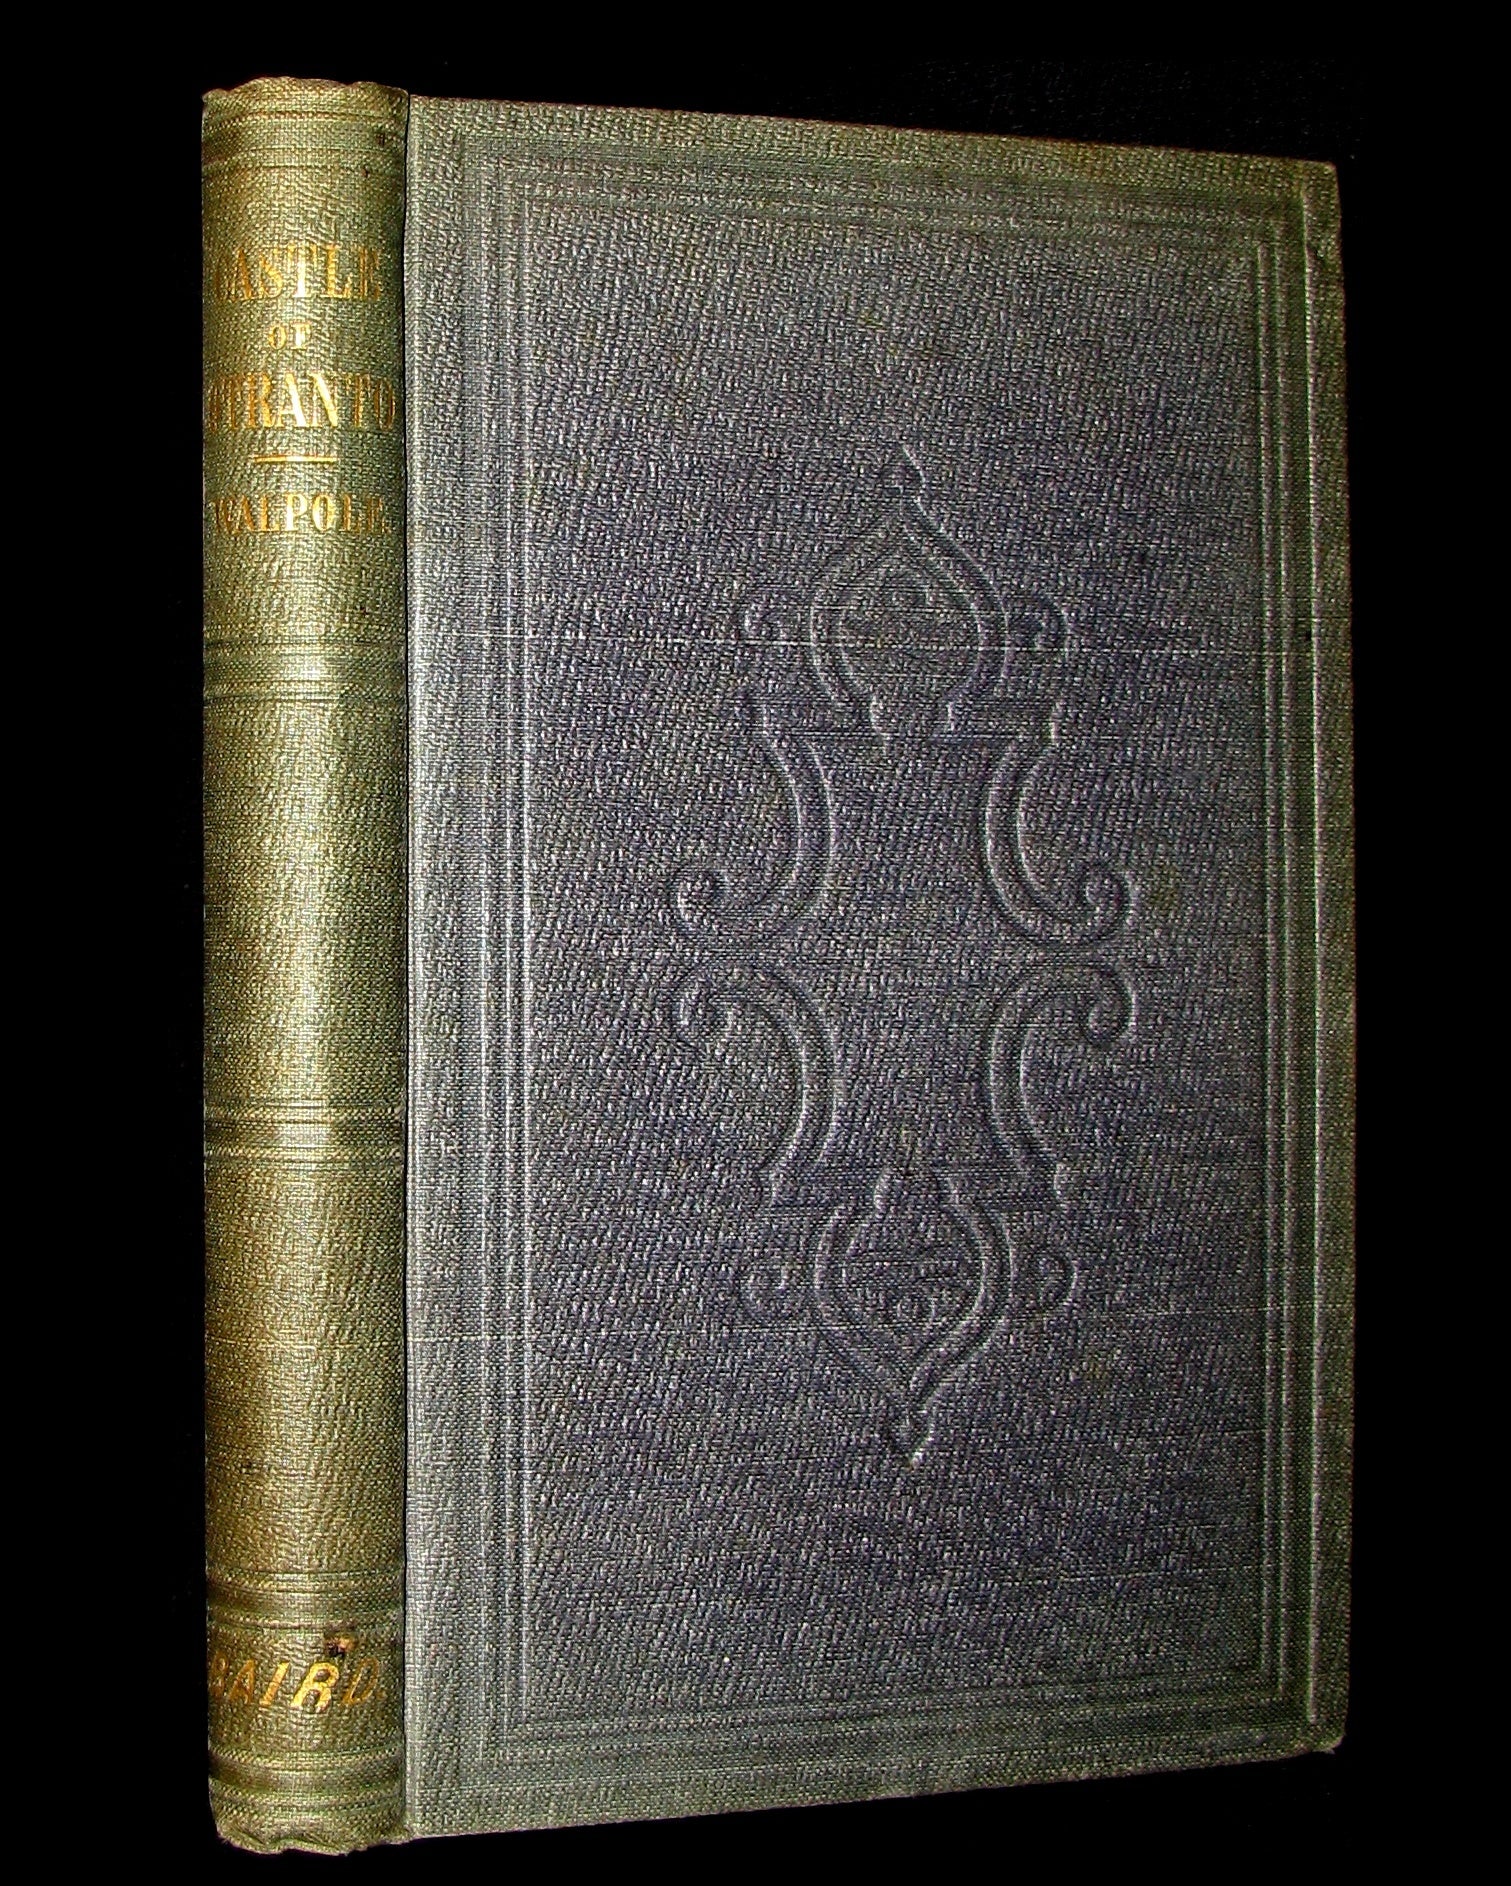 1854 Rare First US Edition - The Castle of Otranto, a Gothic Story by Horace Walpole